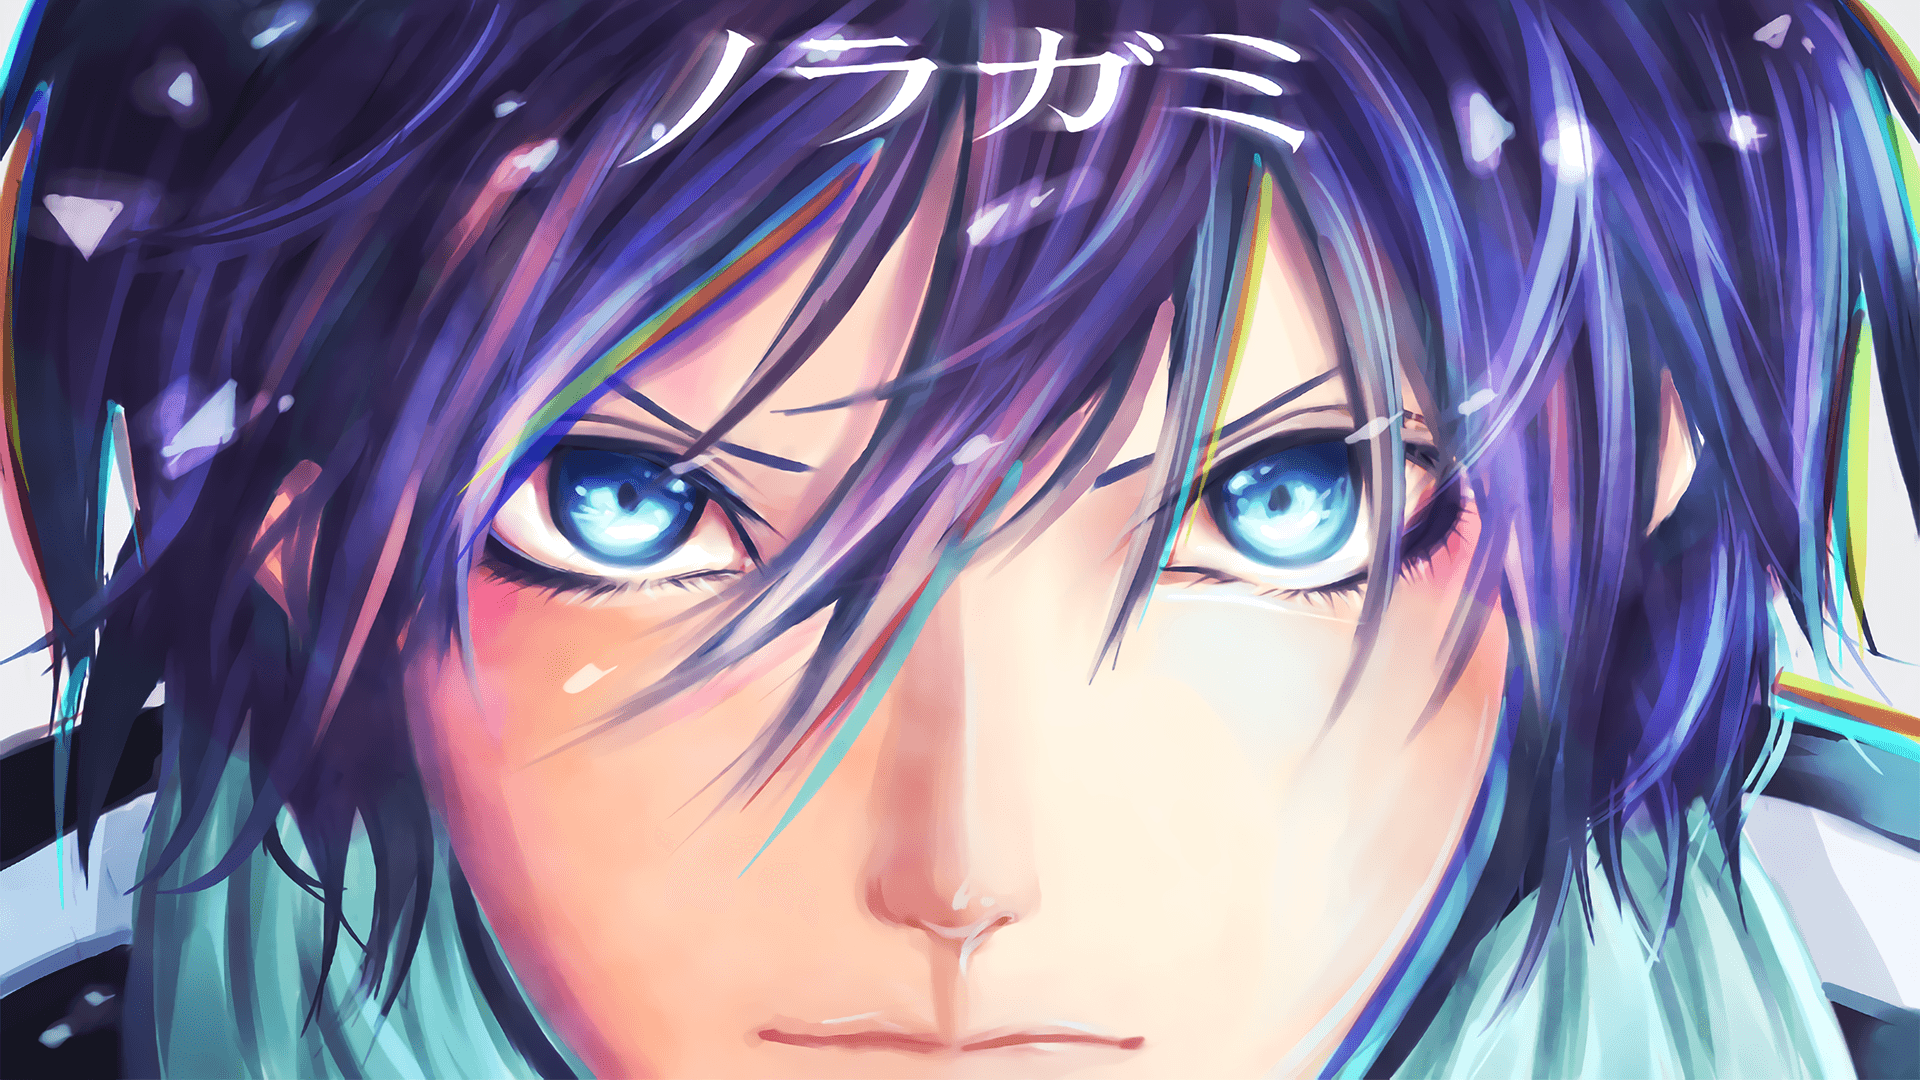 Yato, the God of Fortune from Noragami